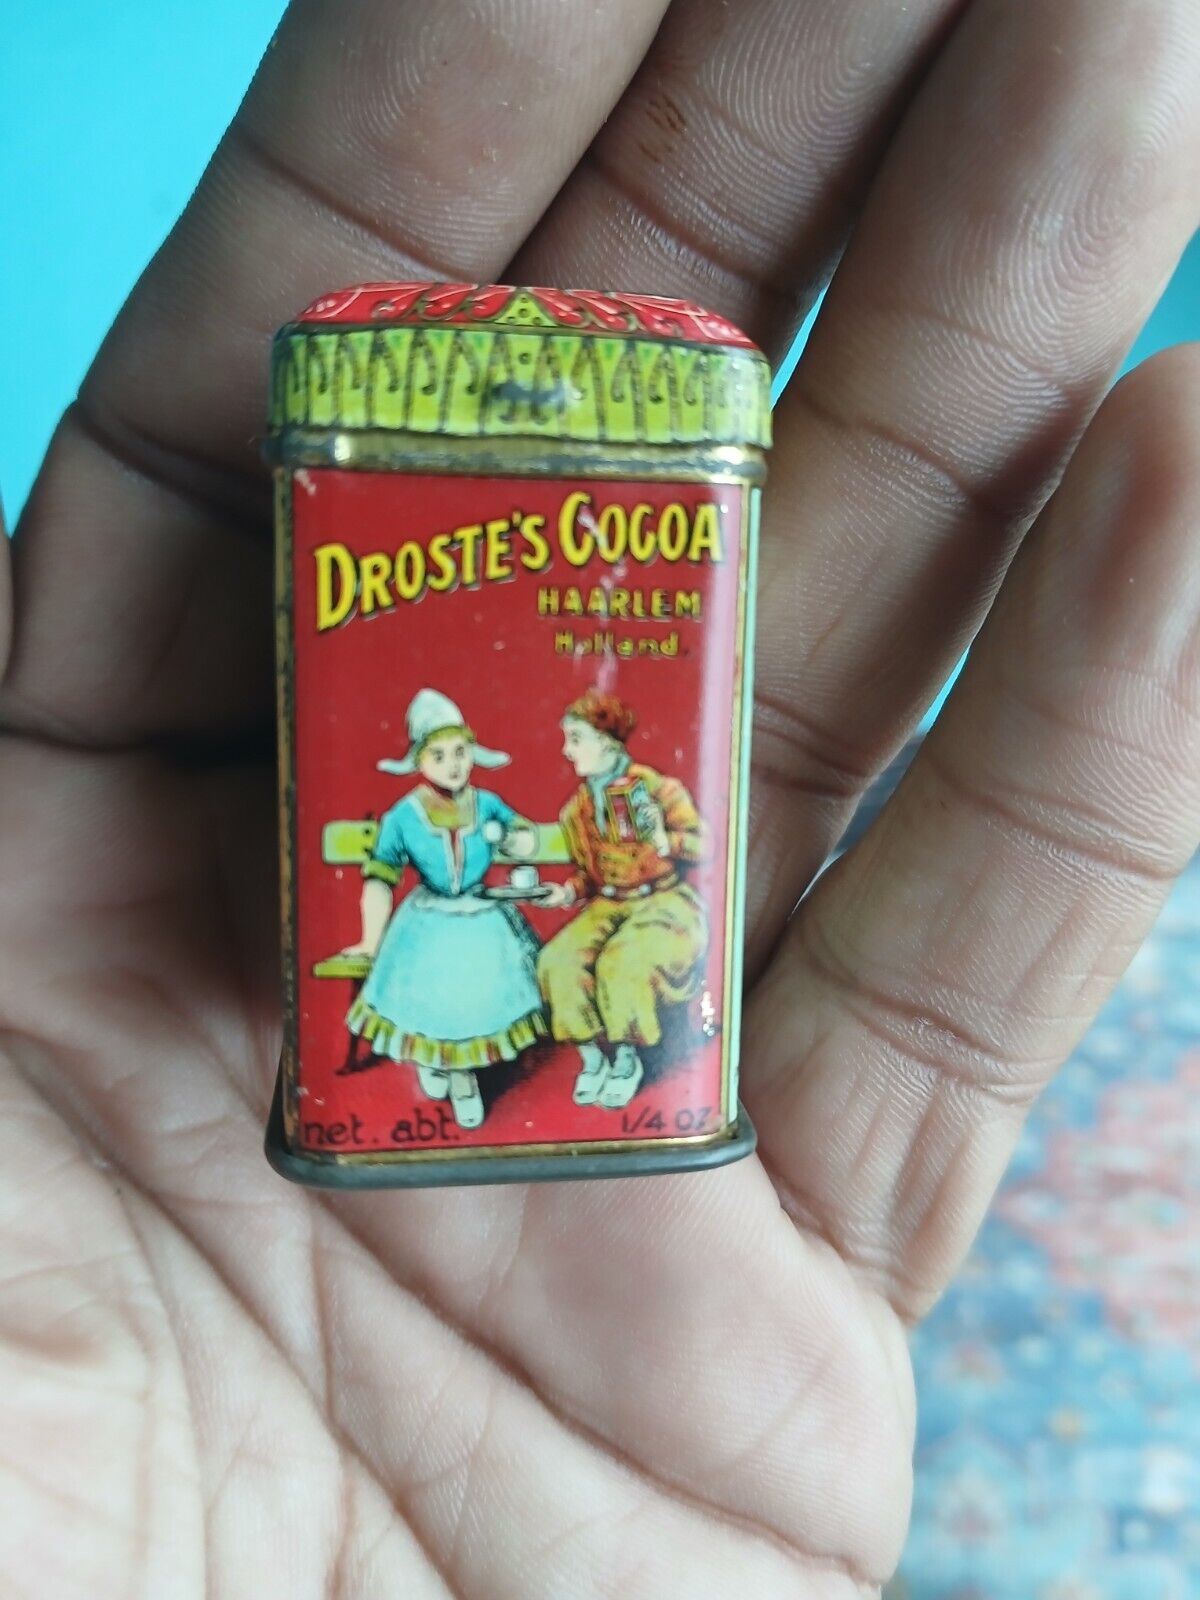 vtg Droste's Cocoa 1/4 oz free sample tin cocoa can 1 x 2 inches Haarlem Holland